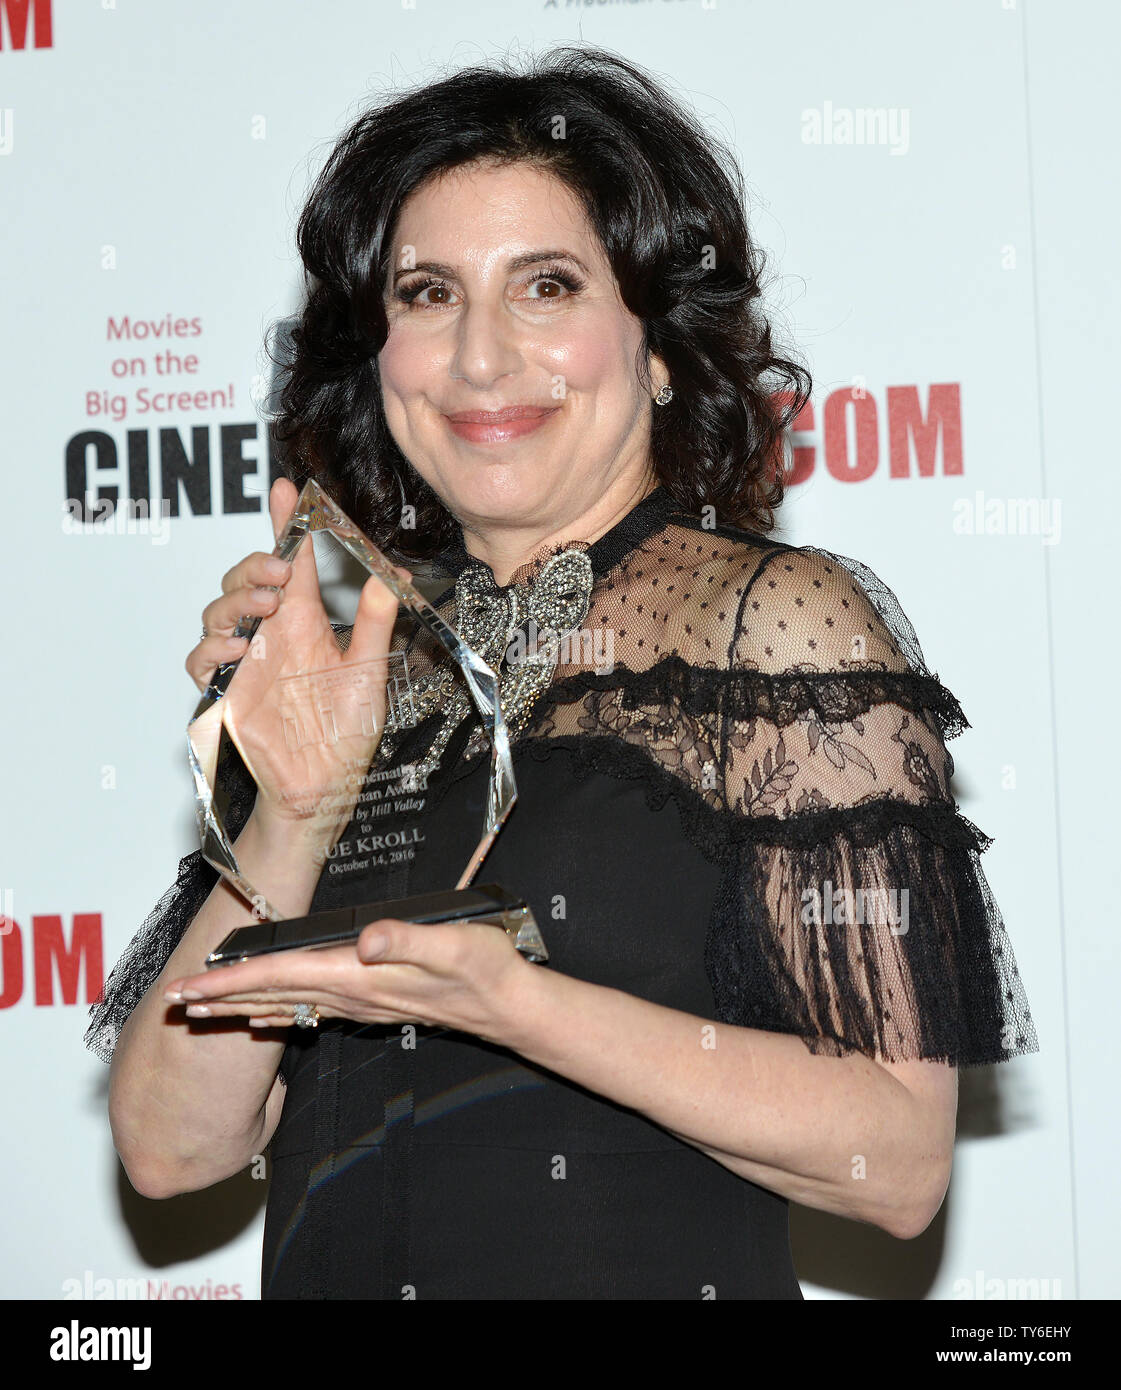 Honoree Sue Kroll holds up the 2nd Annual Sid Grauman Award she received from the American Cinematheque at the organization's annual award show at the Beverly Hilton in Beverly Hills, California on October 14, 2016. The event is a fundraiser to benefit the community film programs of the American Cinematheque, a non-profit viewer-supported arts organization that preserves the historic Egyptian Theatre on Hollywood Boulevard and the Aero Theatre in Santa Monica. Photo by Christine Chew/UPI Stock Photo